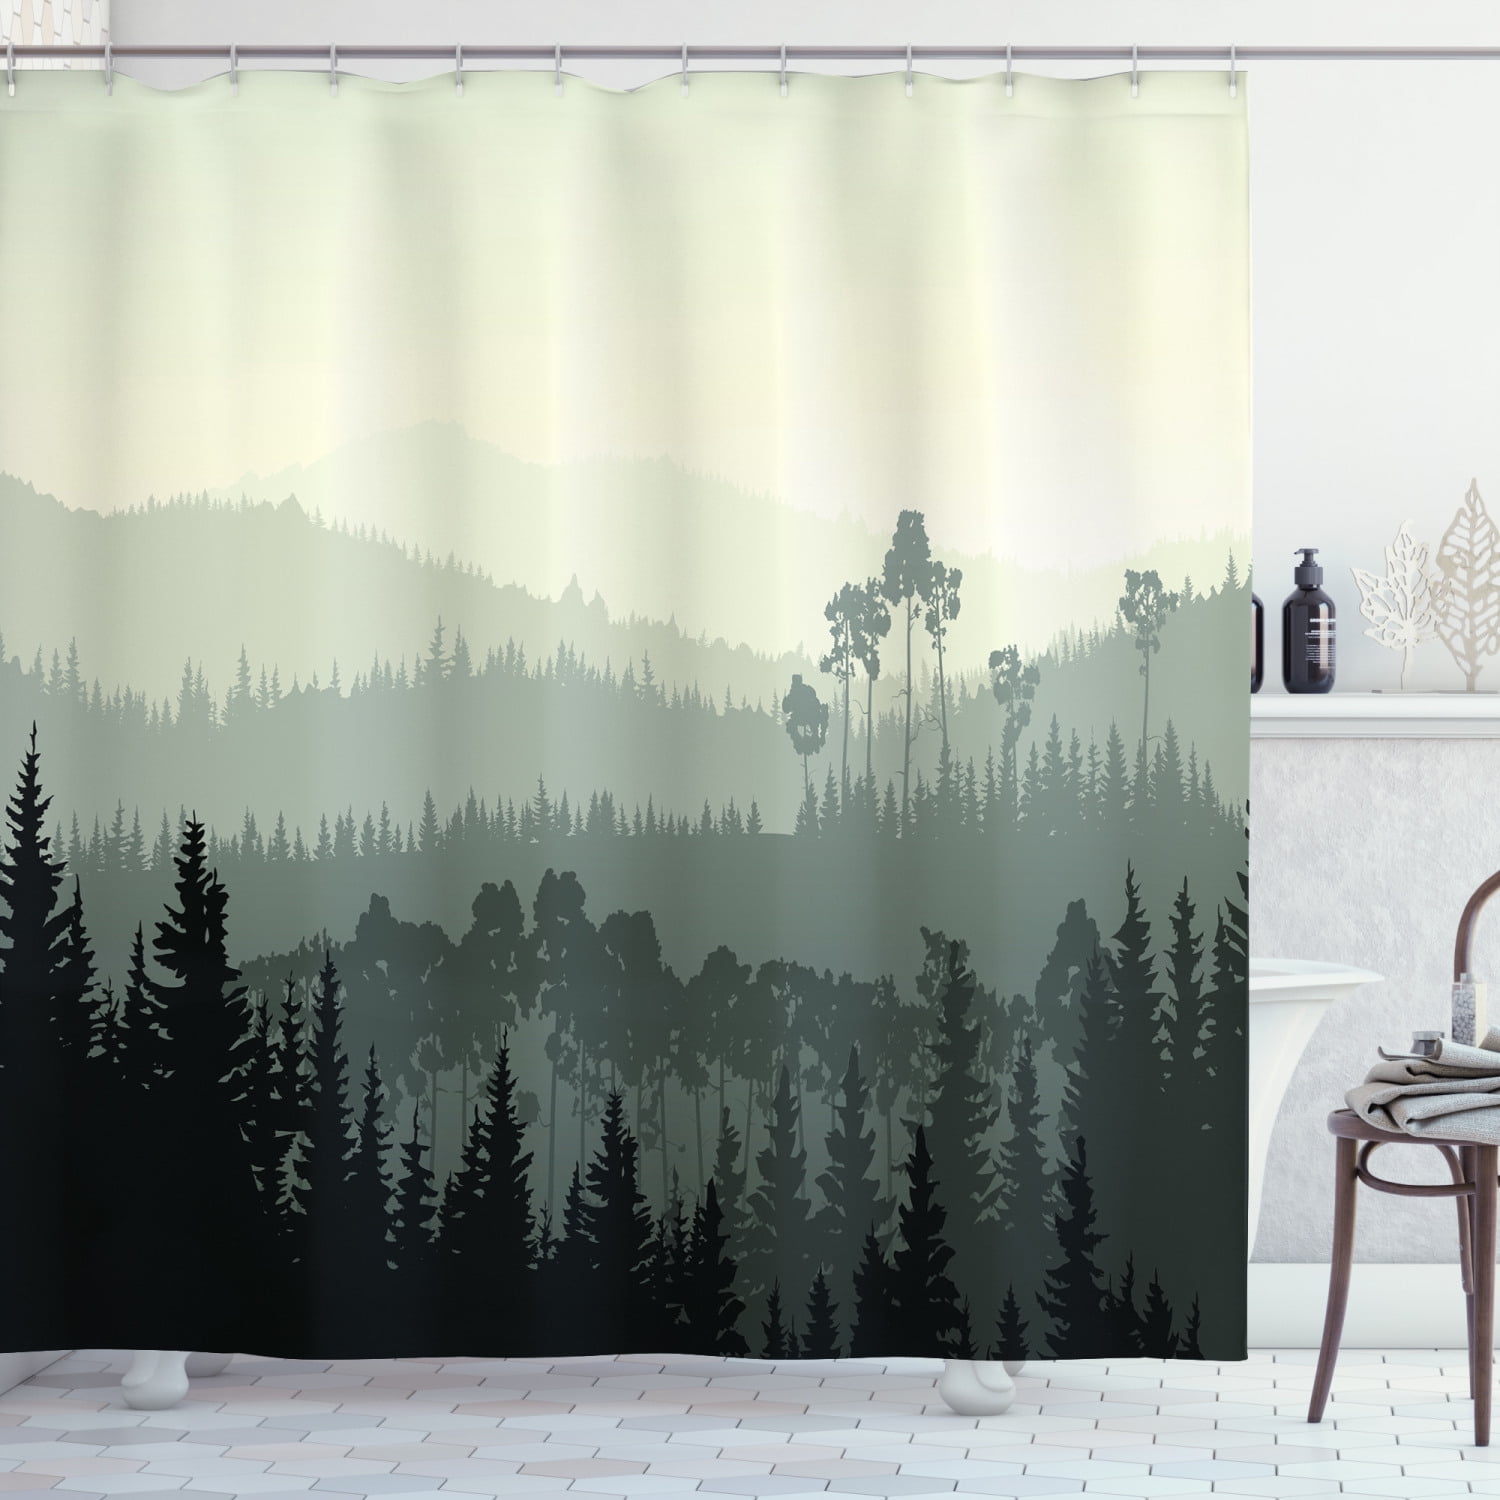 Elk House In Mountain Forest Bathroom Shower Curtain Fabric w/12 Hooks 71*71inch 